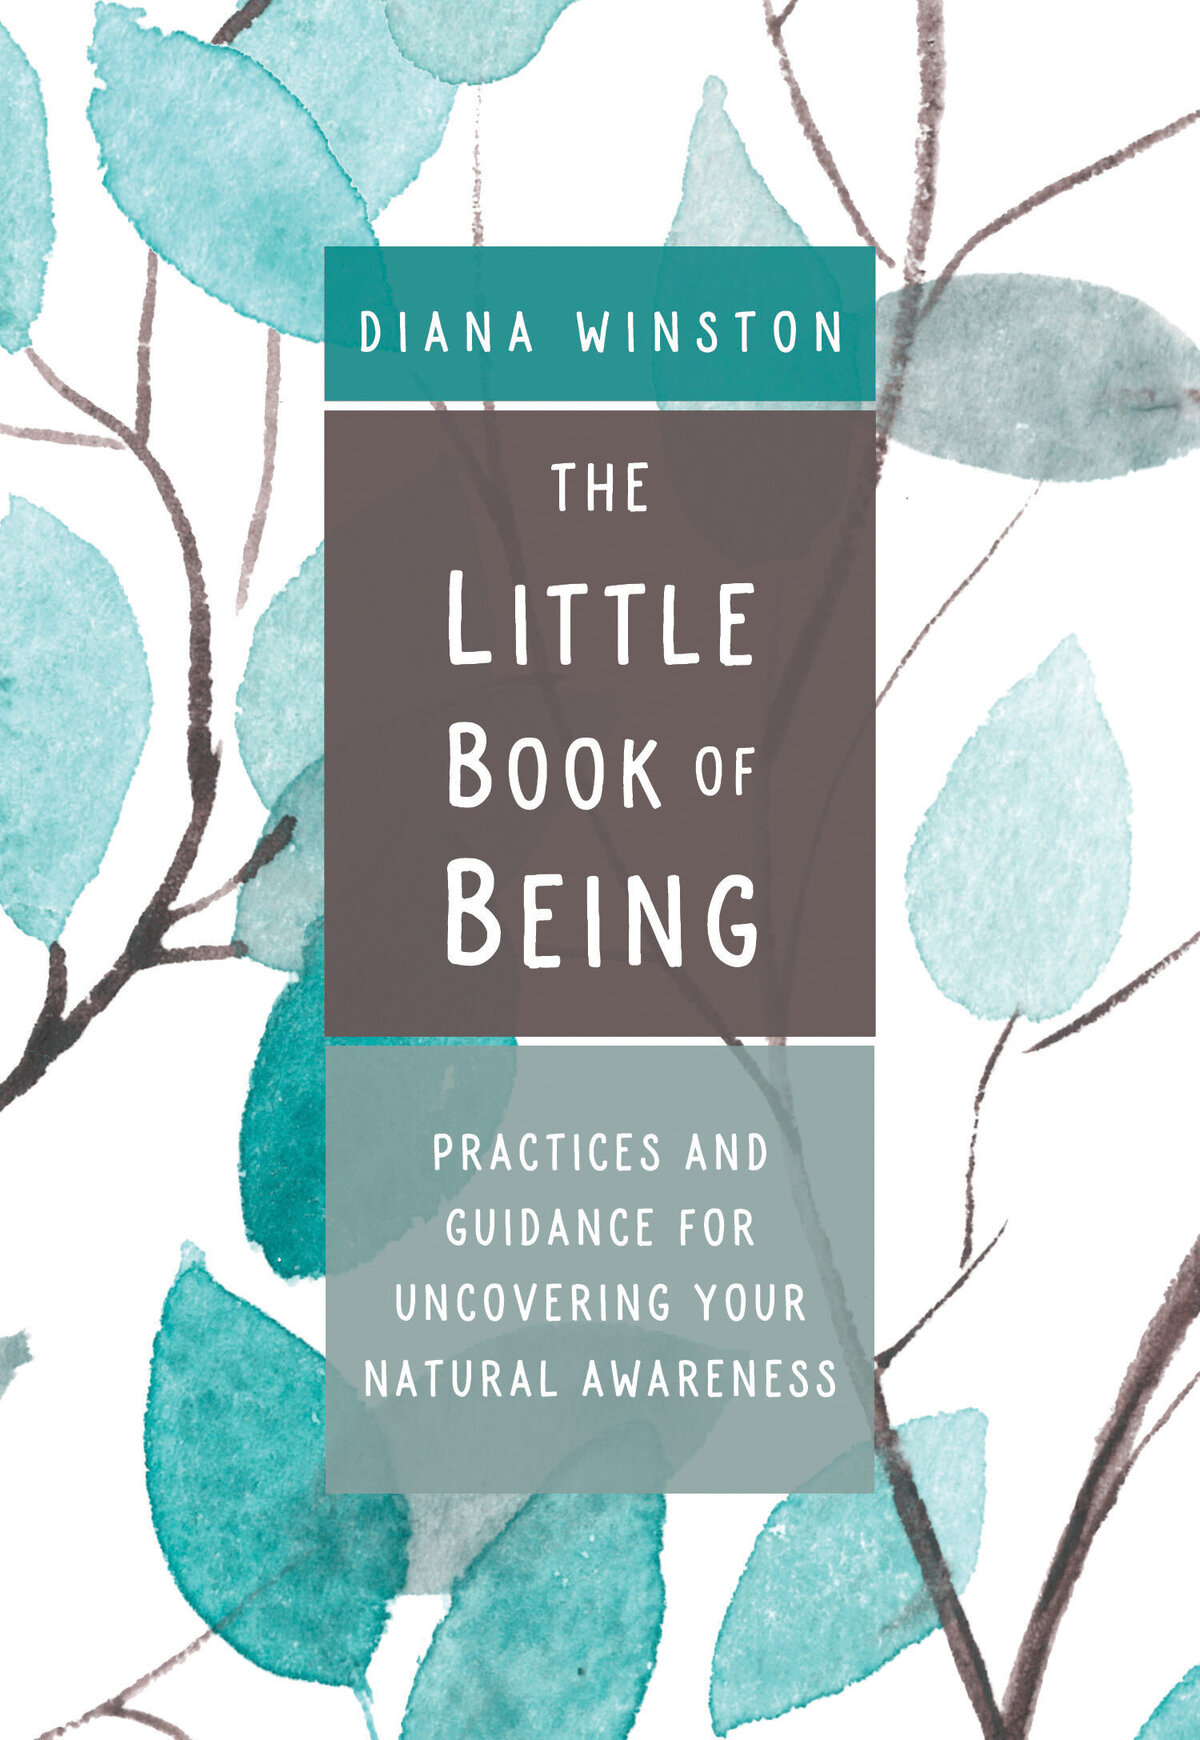 Books and Articles by Mindfulness Educator Diana Winston